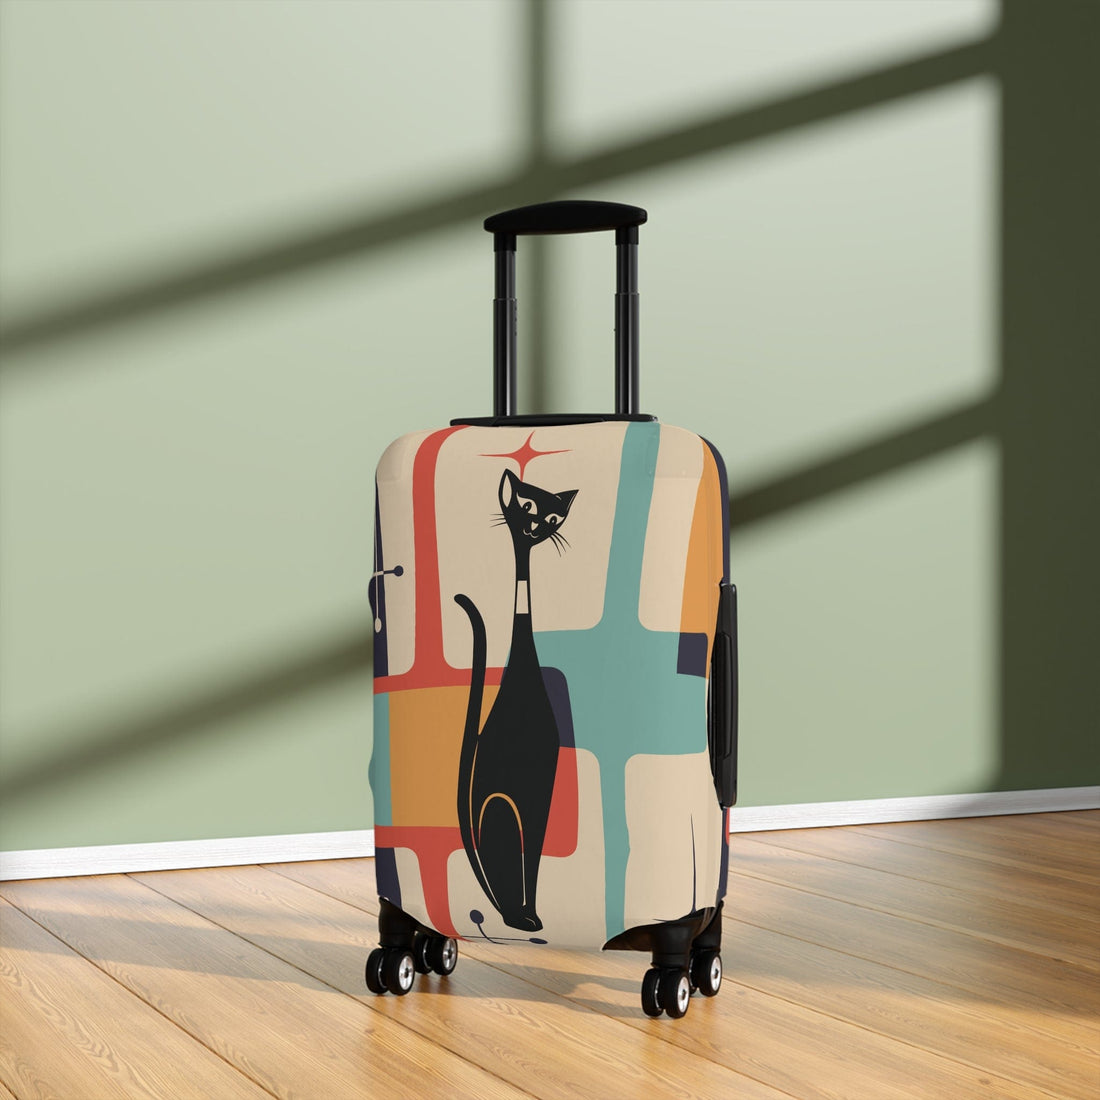 Kate McEnroe New York Retro Atomic Cat Luggage Cover, Mid - Century Teal &amp; Mustard Design, Vintage Style Suitcase ProtectorLuggage Covers20806094676411594419